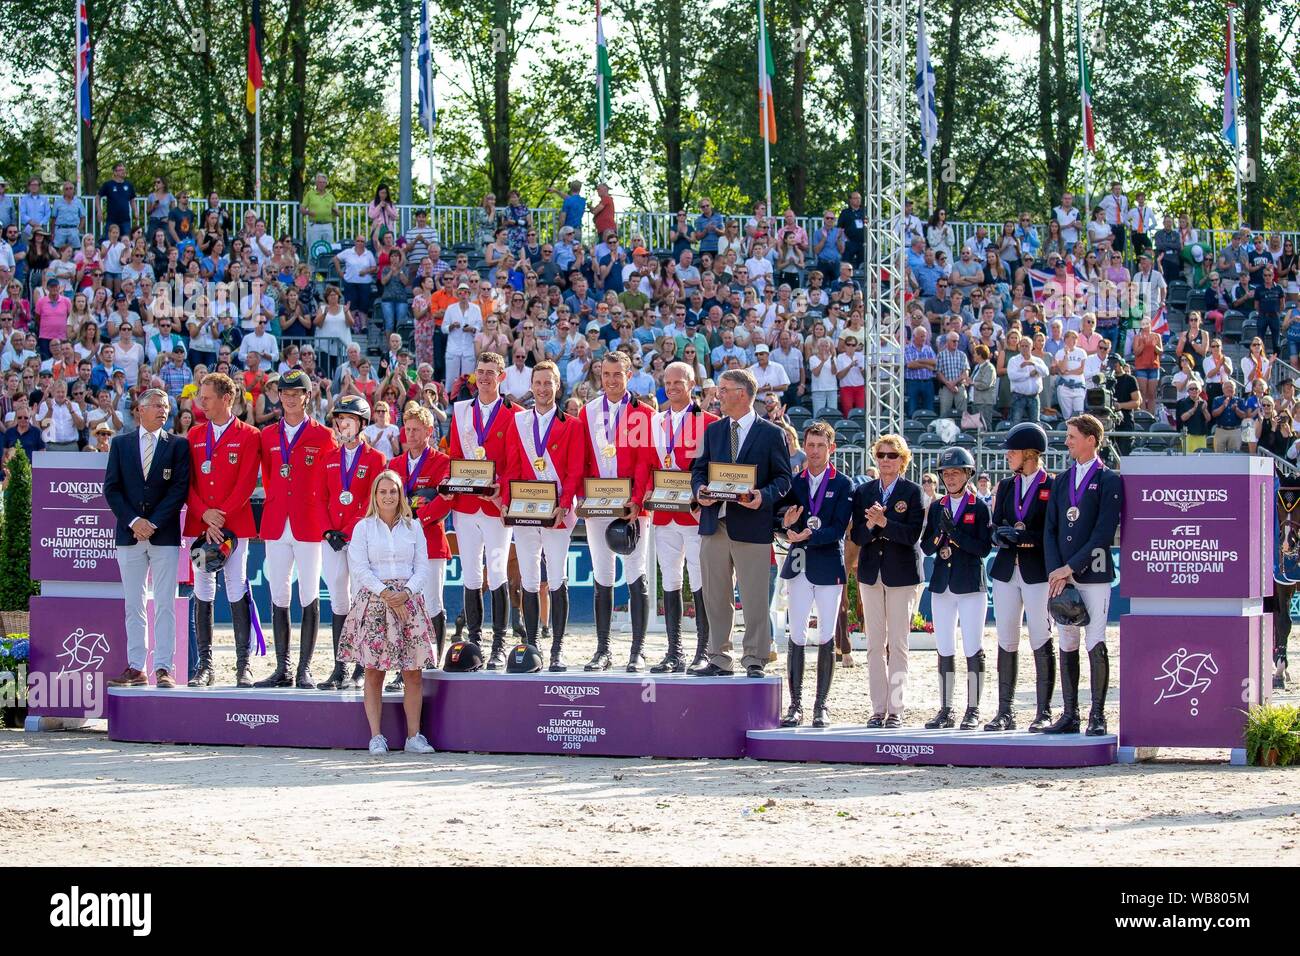 Rotterdam. Netherlands. 23 August 2019. The winners on the Podium in the prizegiving for the Team Final. Showjumping. Longines FEI European Championships. Credit Elli Birch/SIP photo agency/Alamy live news. Stock Photo